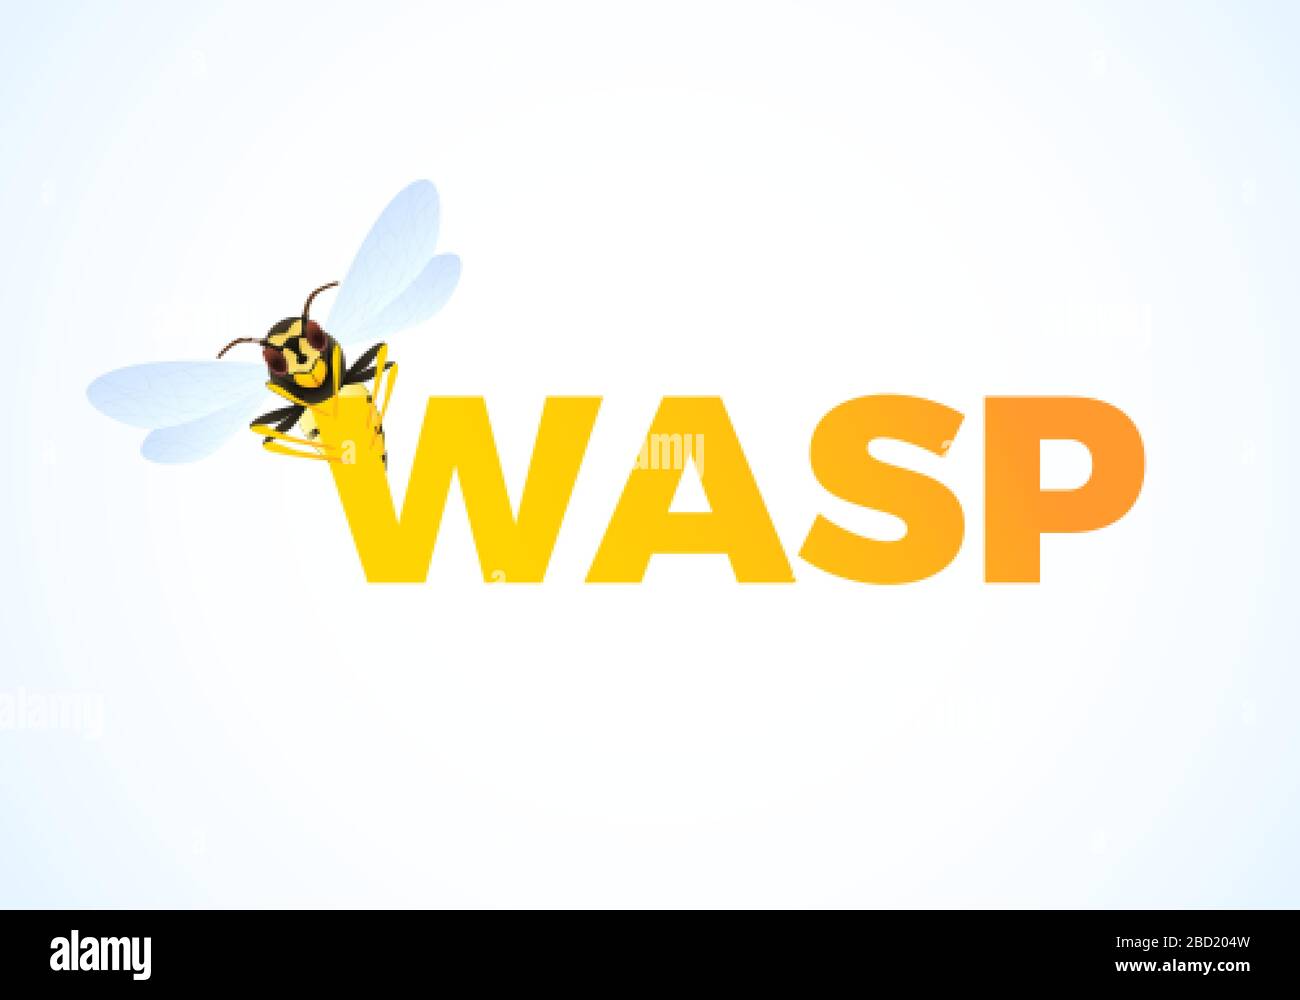 Wasp cartoon on color text. Predatory insect. Yellow striped wasp. Vector illustration isolated on white background Stock Vector